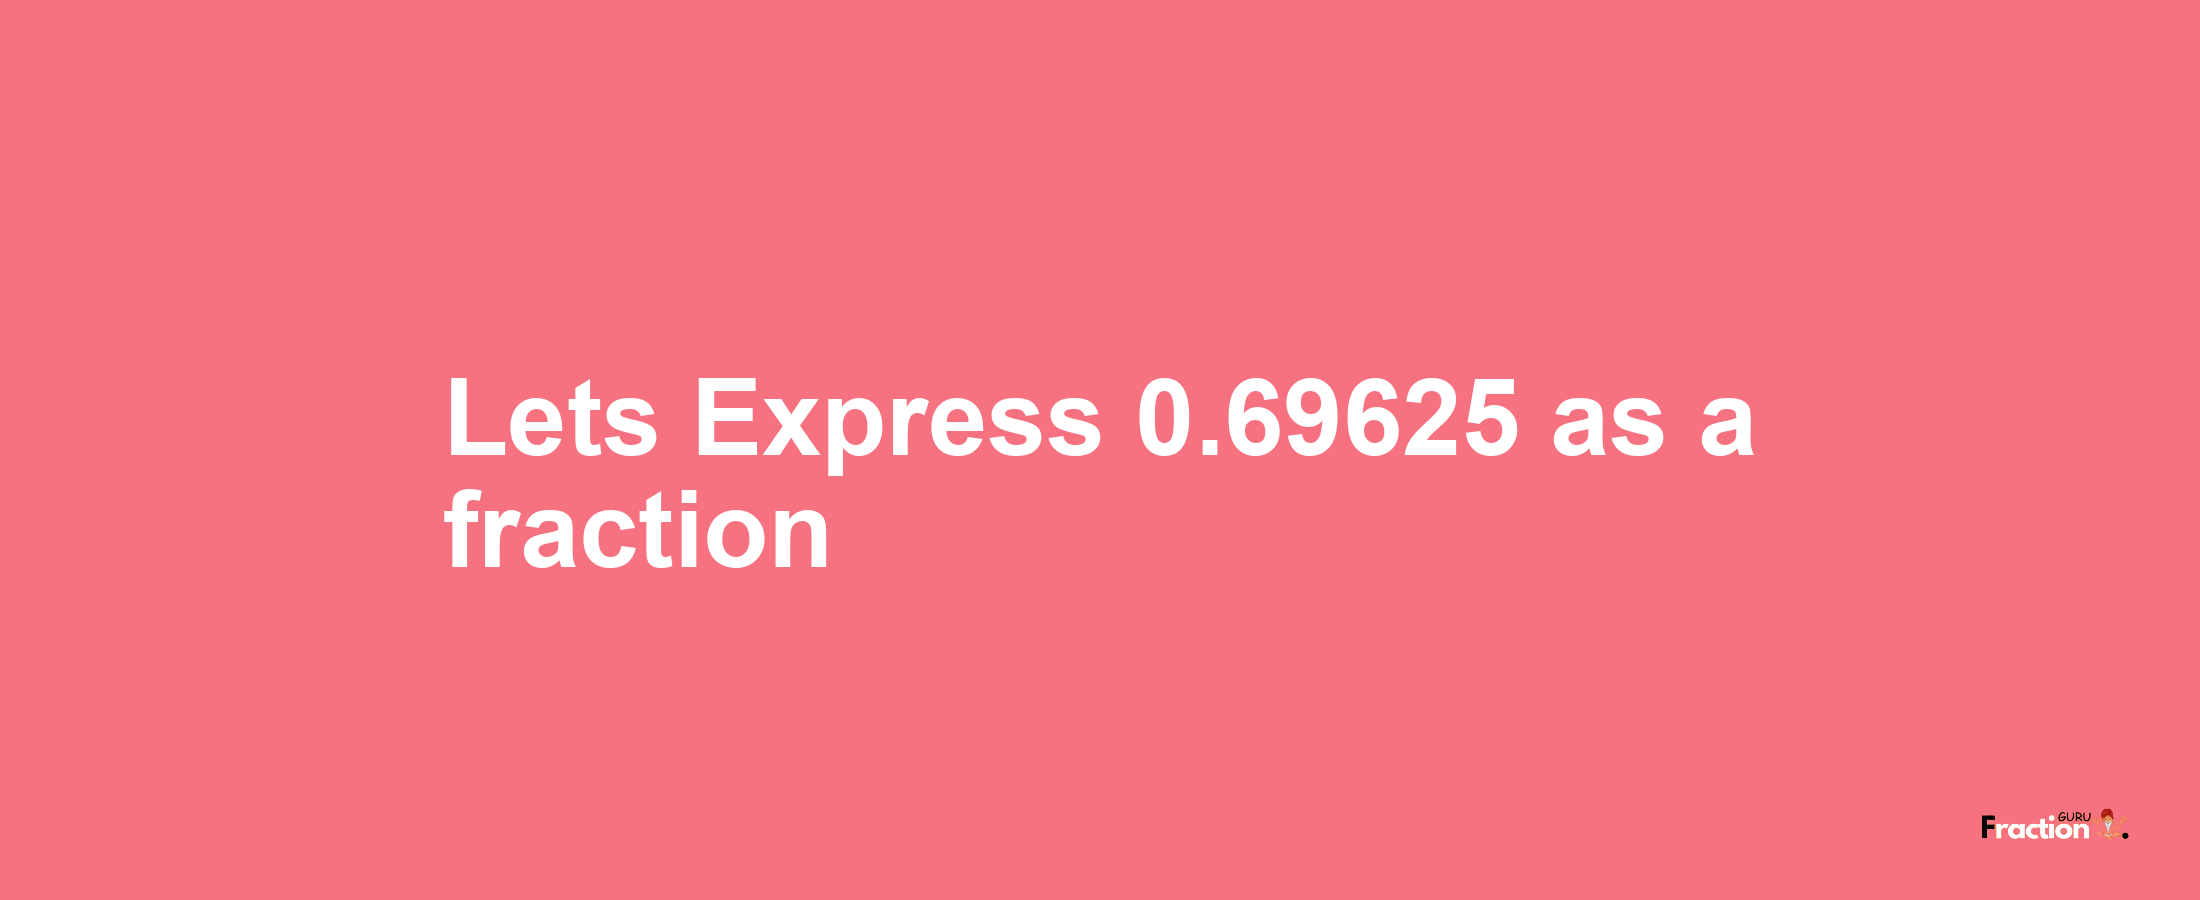 Lets Express 0.69625 as afraction